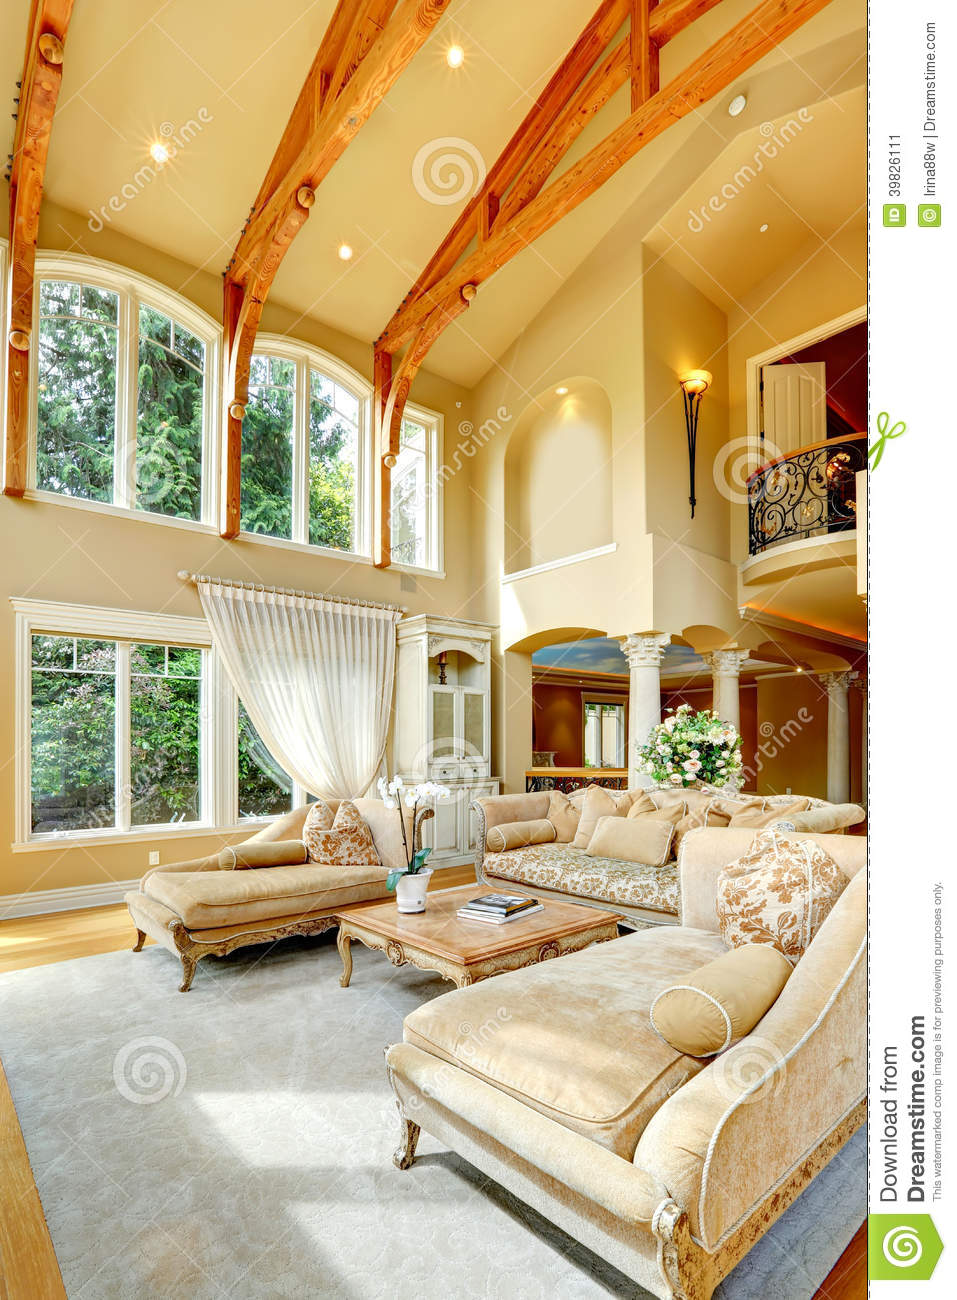     Living Room With High Ceiling Antique Furniture Columns And Balcony